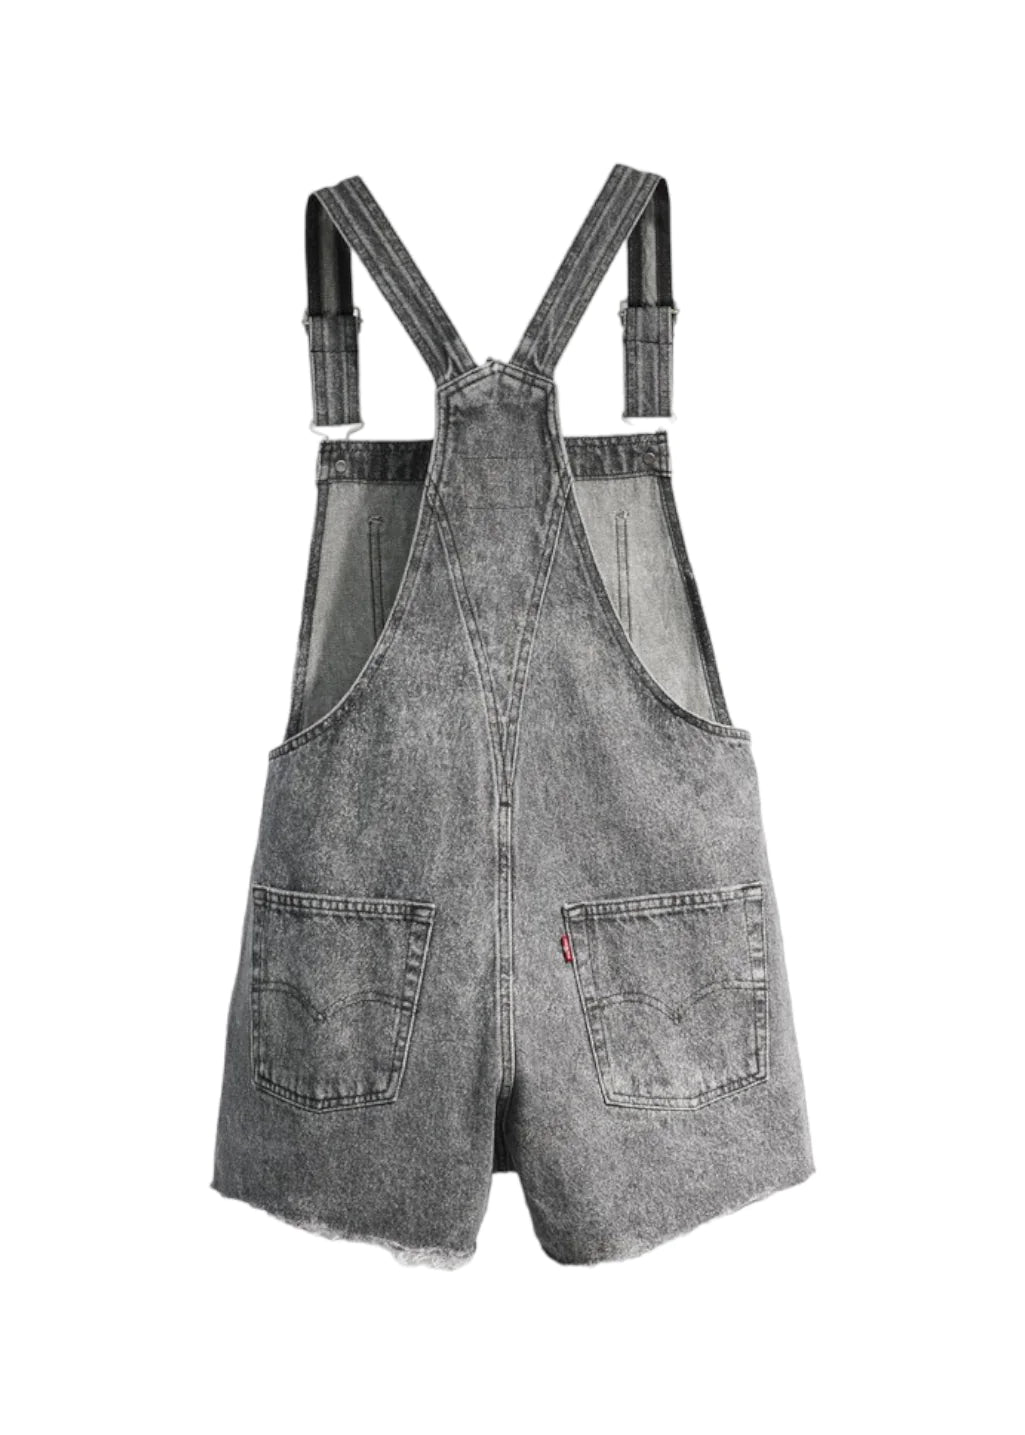 Vintage Shortalls | Out And About